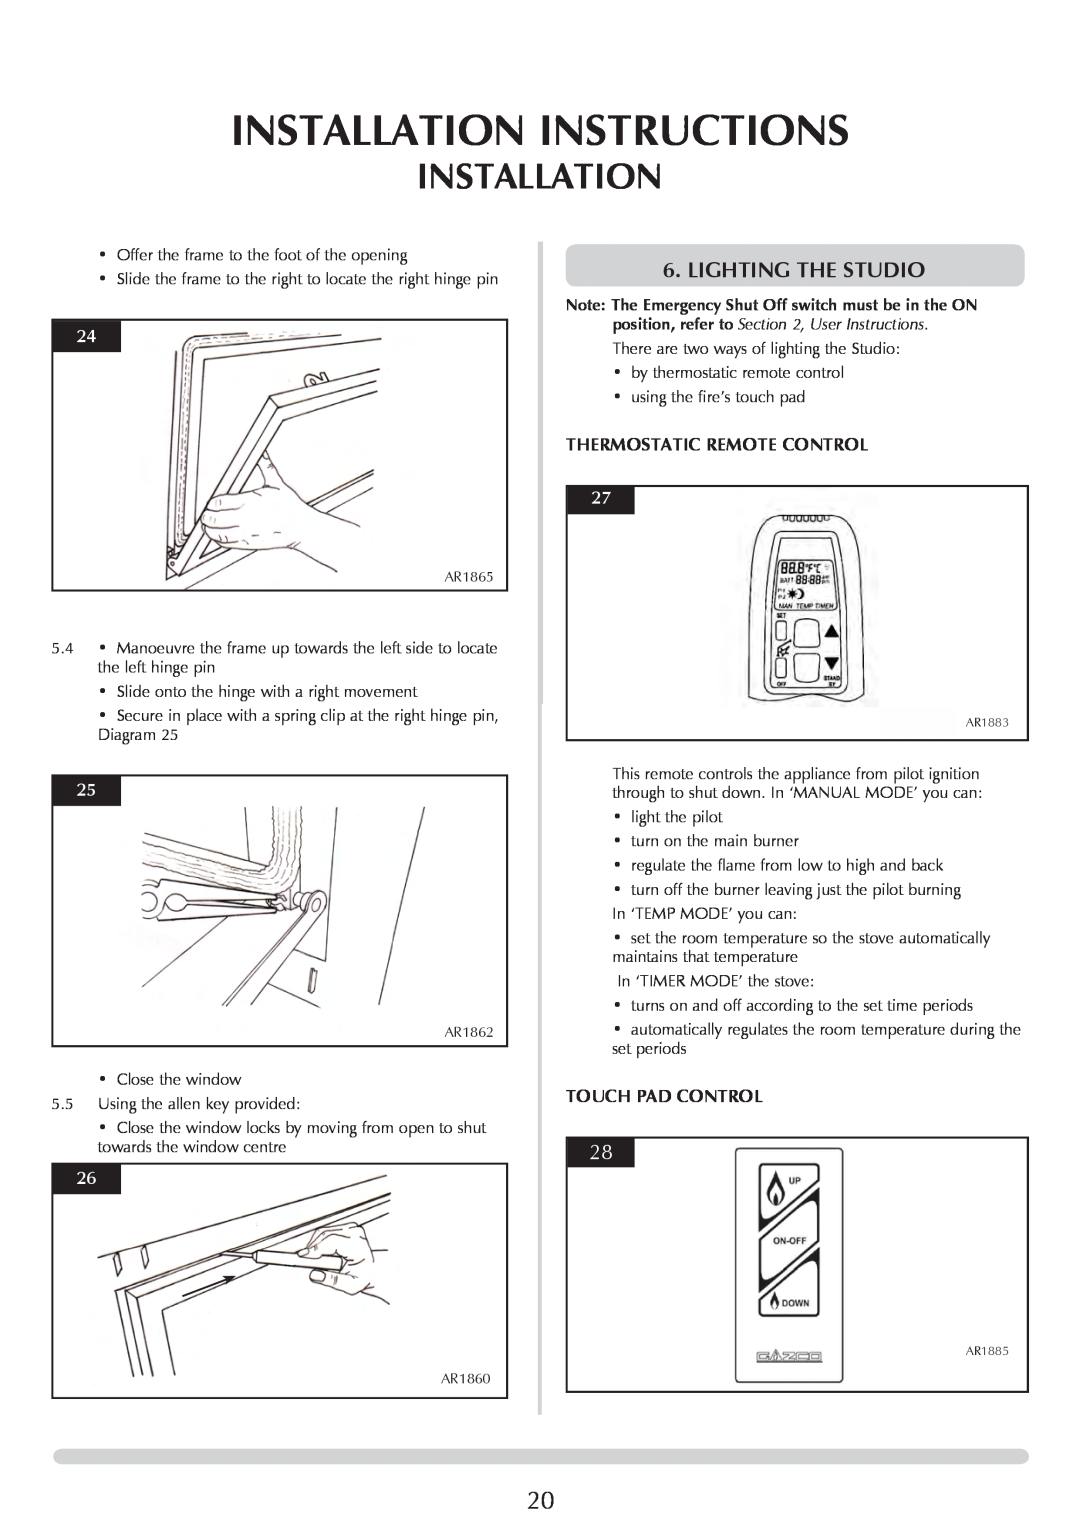 Stovax PR0919 manual Lighting The Studio, Installation Instructions, Thermostatic Remote Control, Touch Pad Control 